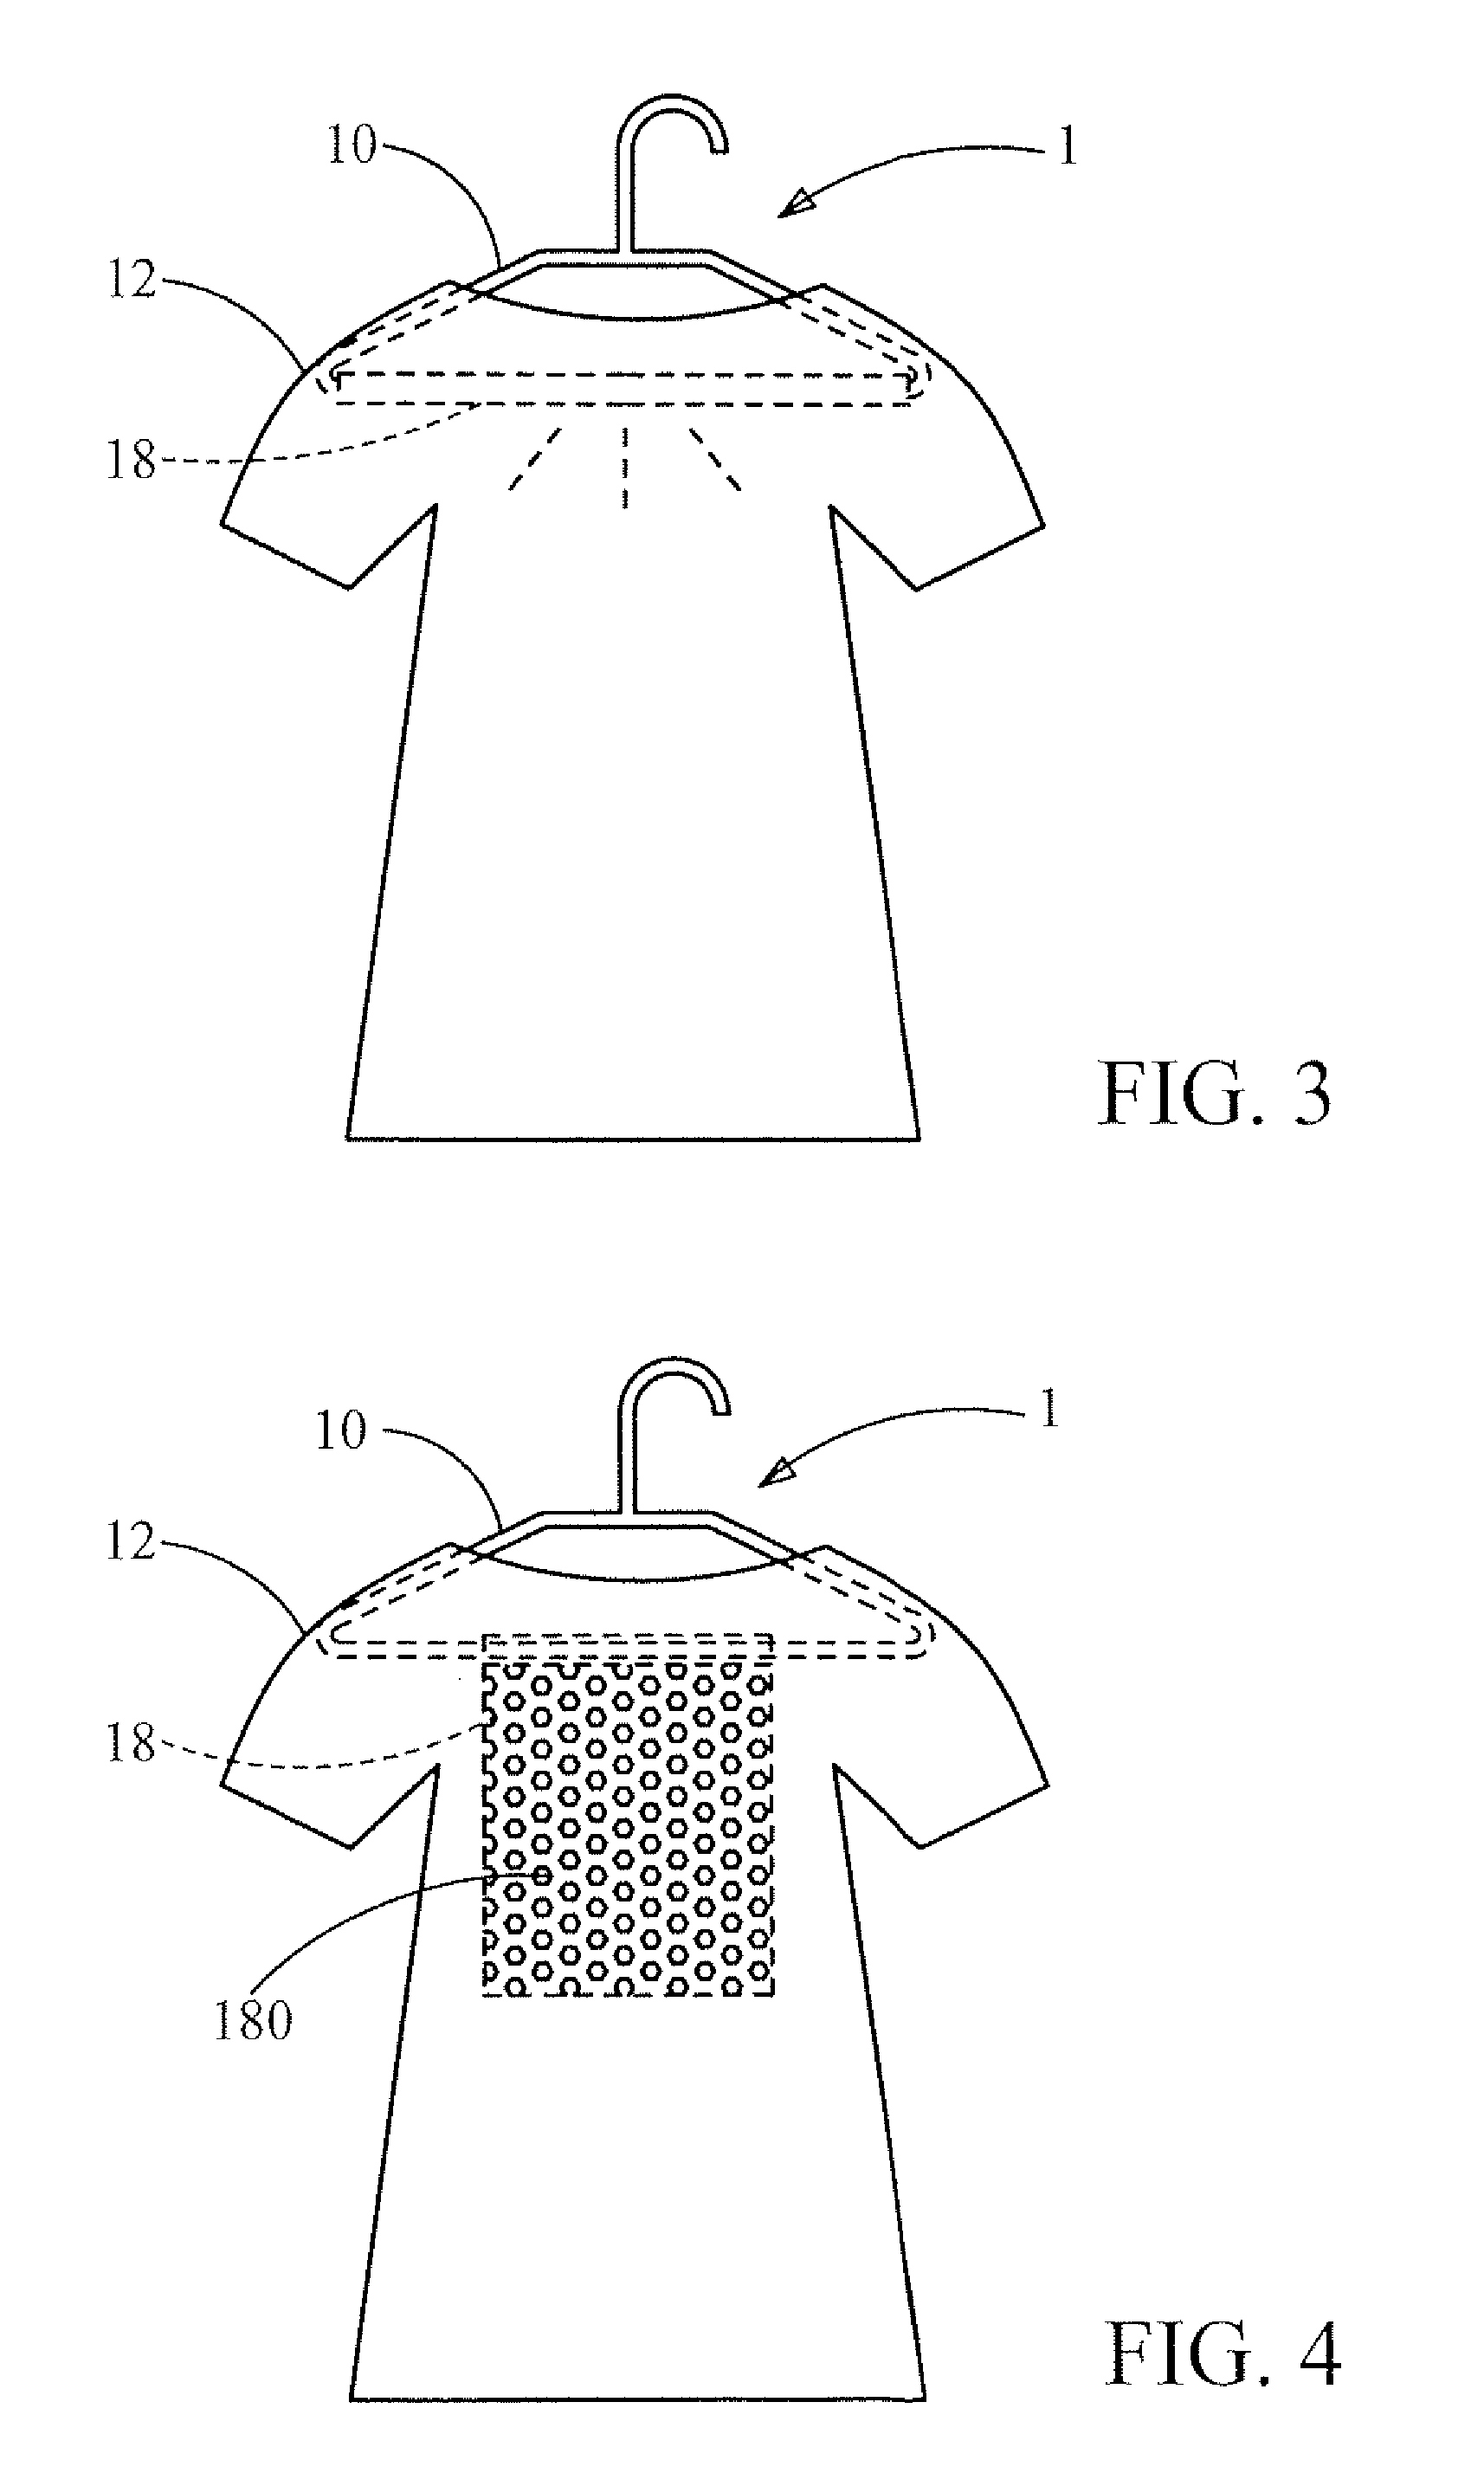 Sterilization apparatus for fabric and shoes